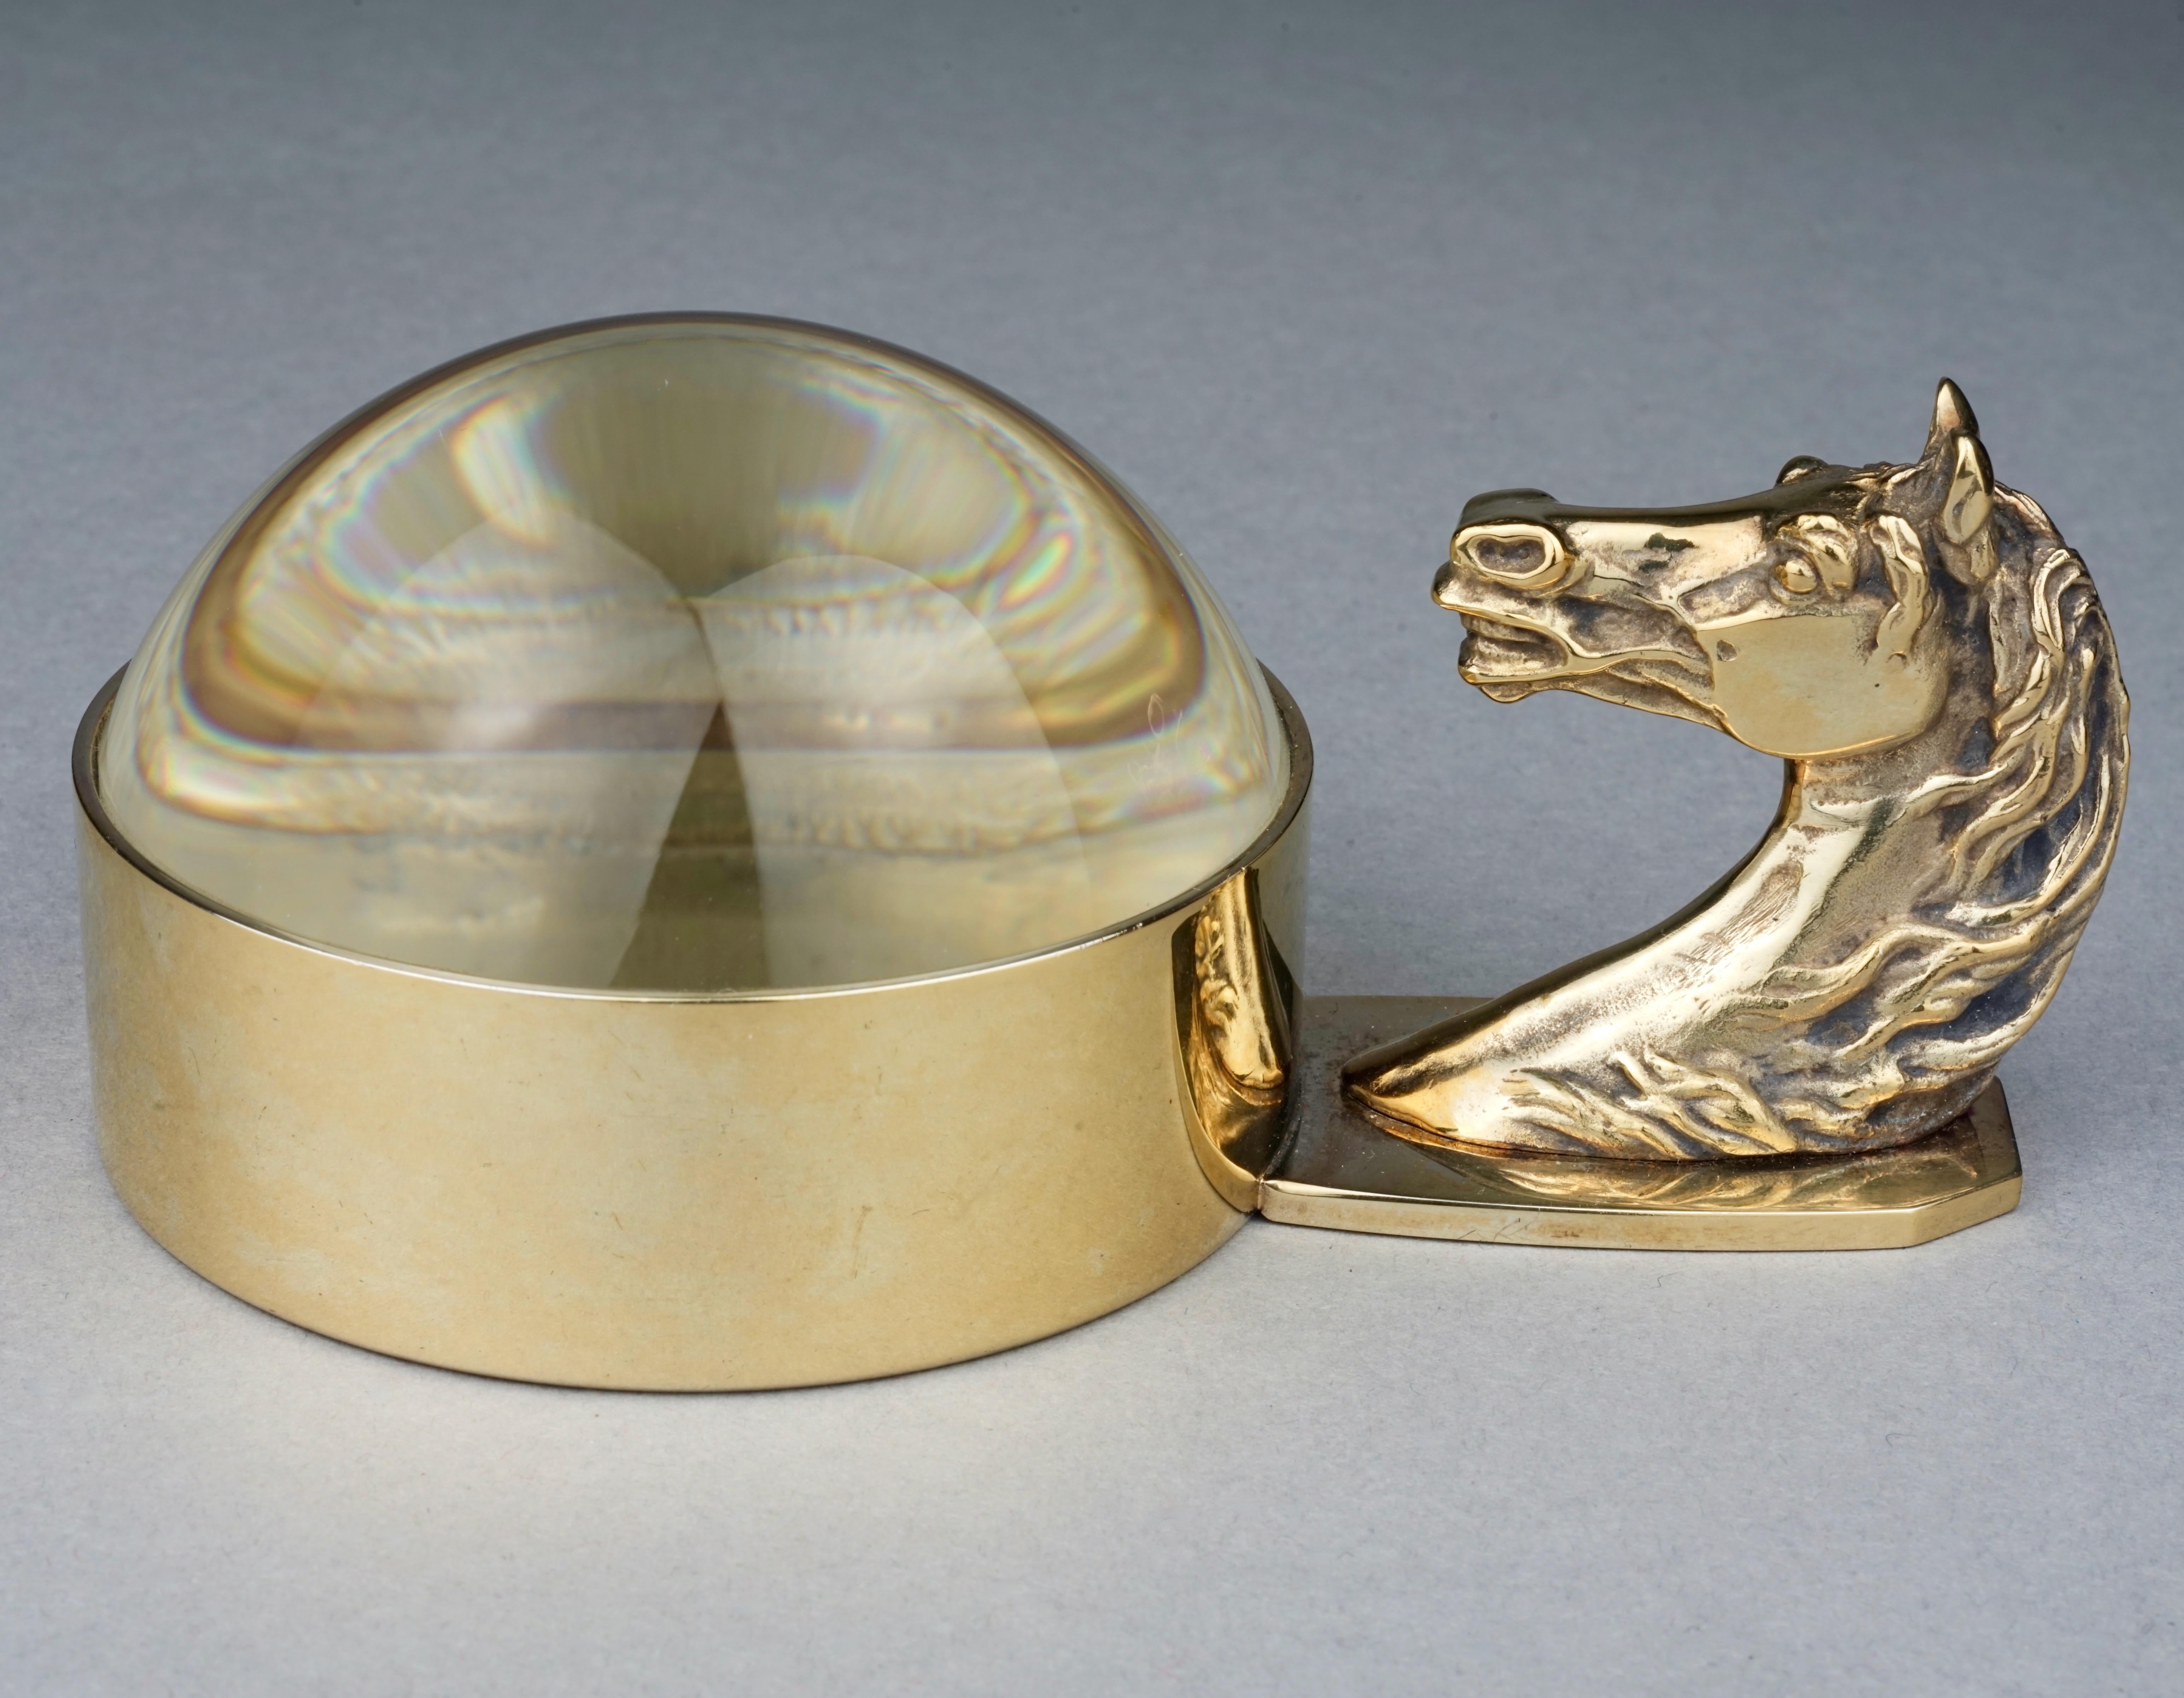 Vintage HERMES Gold Horse Head Art Deco Paperweight Magnifying Glass

Measurements:
Horse Head: 2.12 inches (5.4 cm)
Width: 5.11 inches (13 cm)
Diameter: 3.15 inches (8 cm)

Features:
- 100% Authentic HERMES.
- Horse head handle with dome magnifying